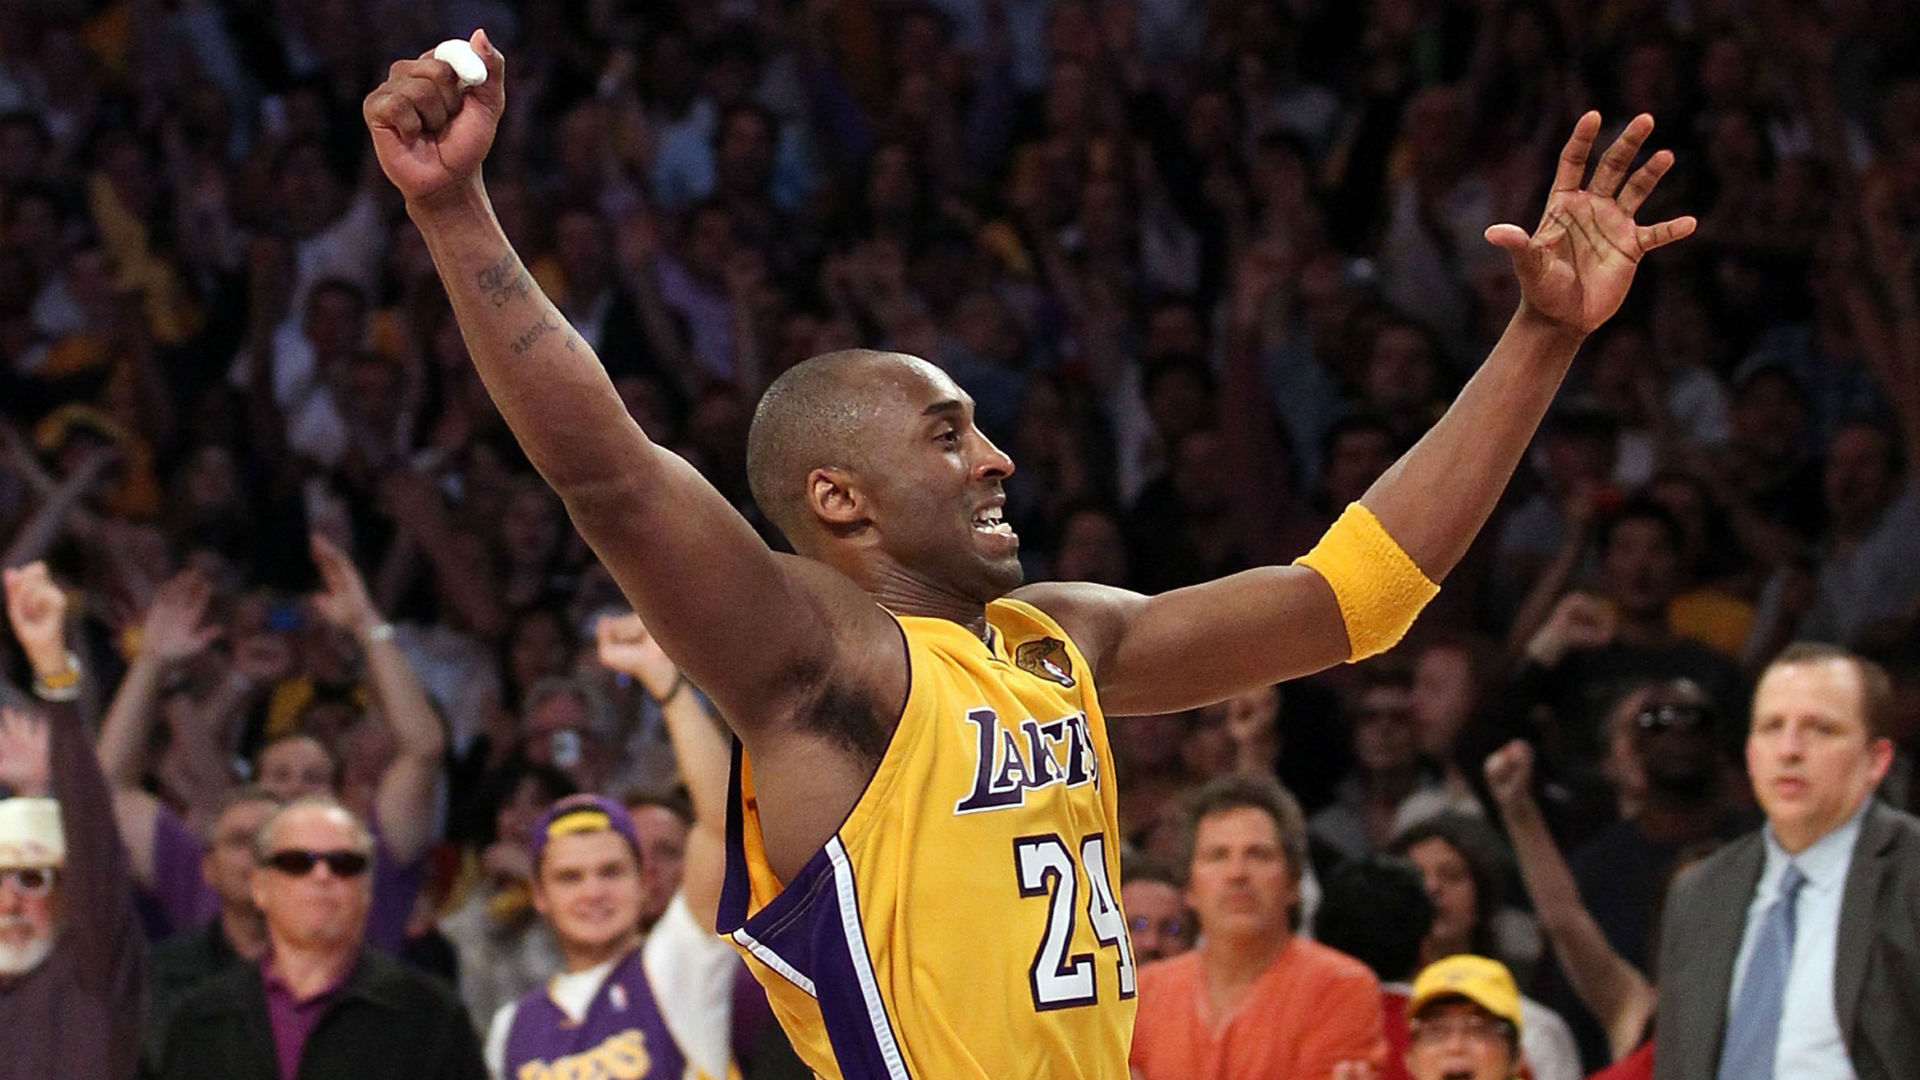 One year on from the death of Kobe Bryant, we look at a basketball superstar whose career achievements highlight his greatness.